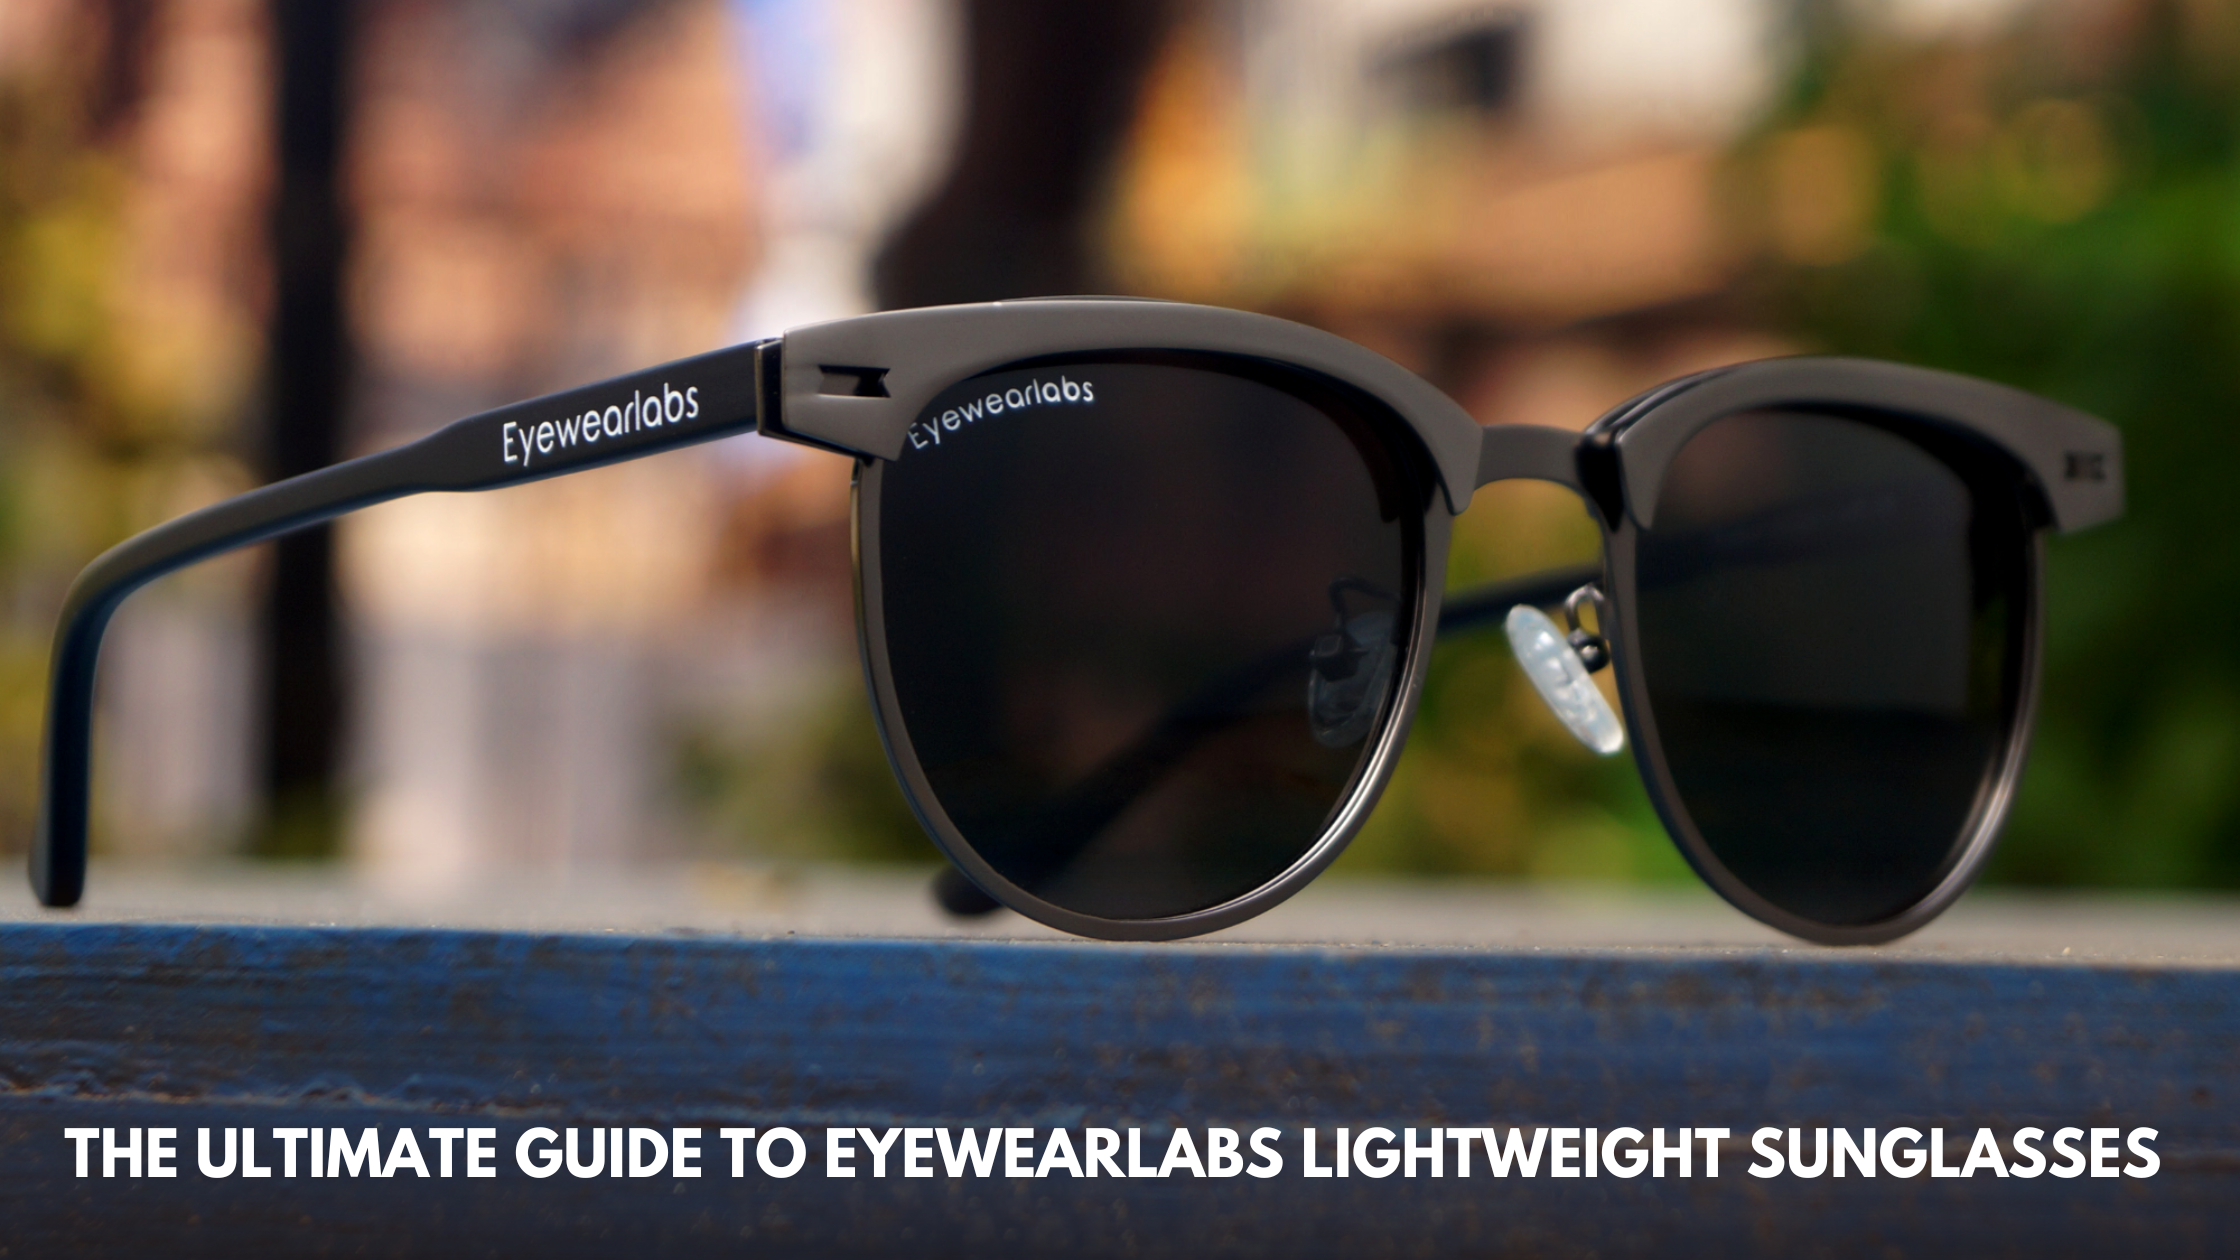 The Ultimate Guide to Eyewearlabs Lightweight Sunglasses